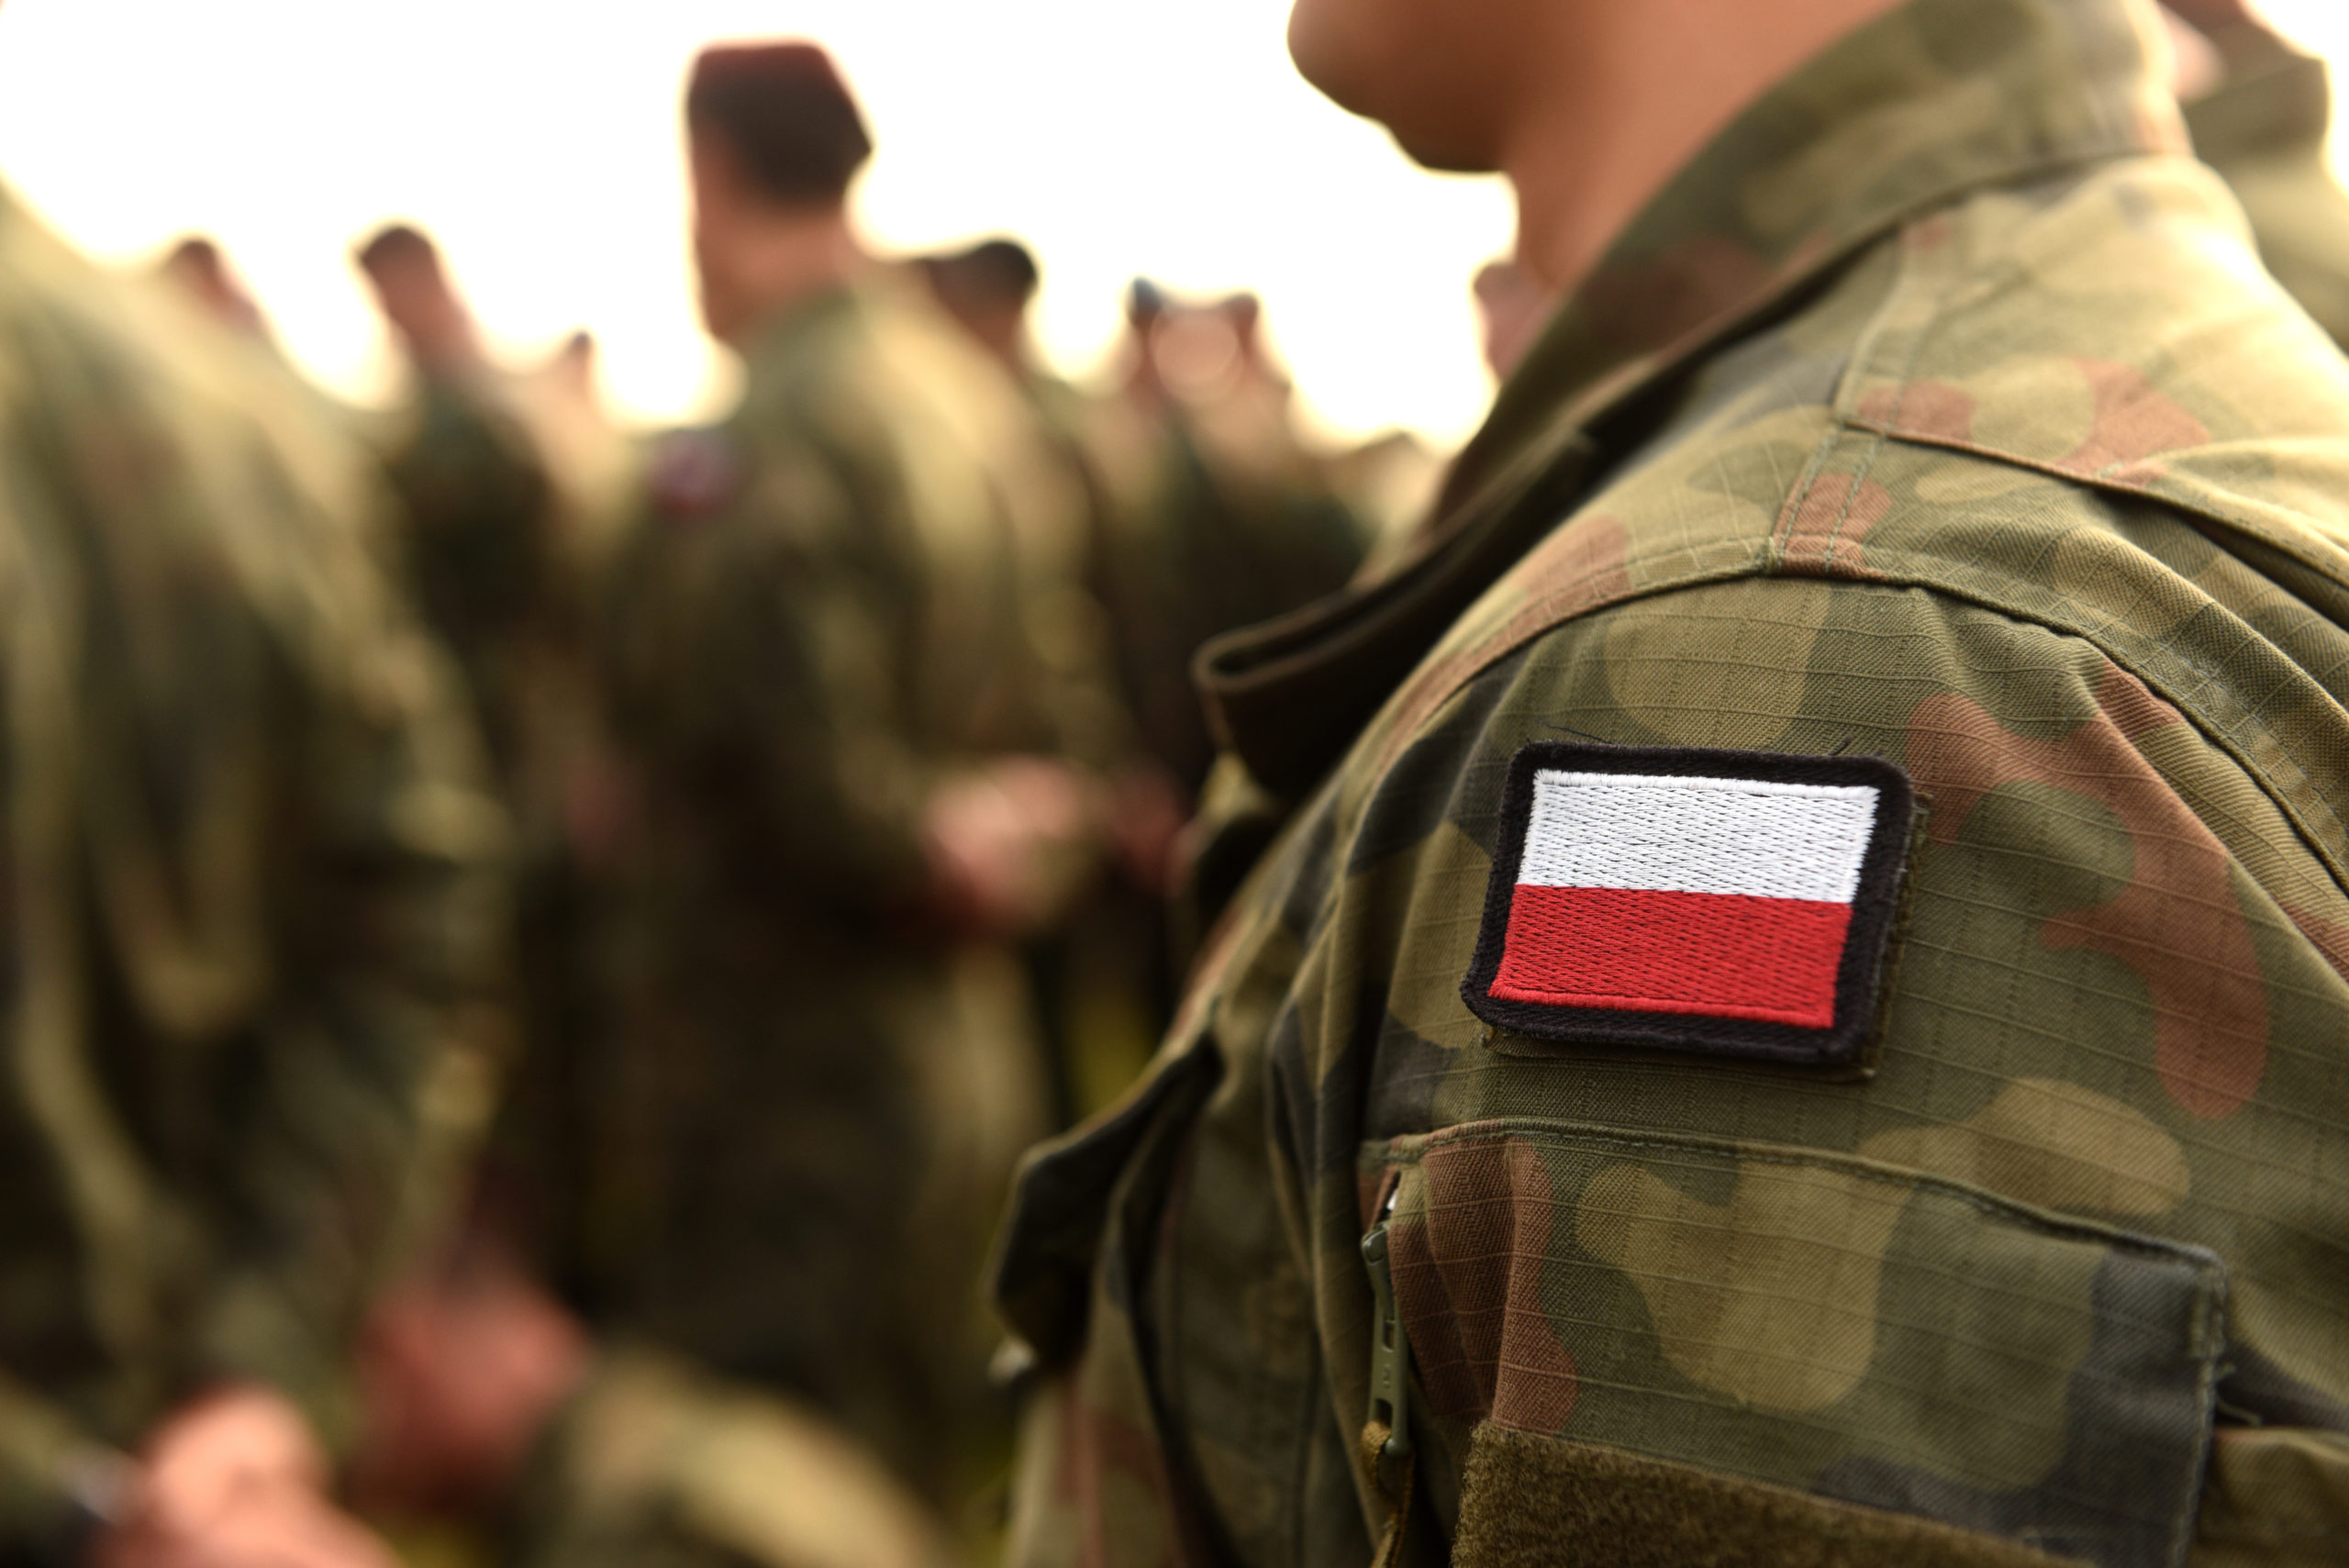 Polish soldiers, a zoom-in on a Polish flag on their uniform.